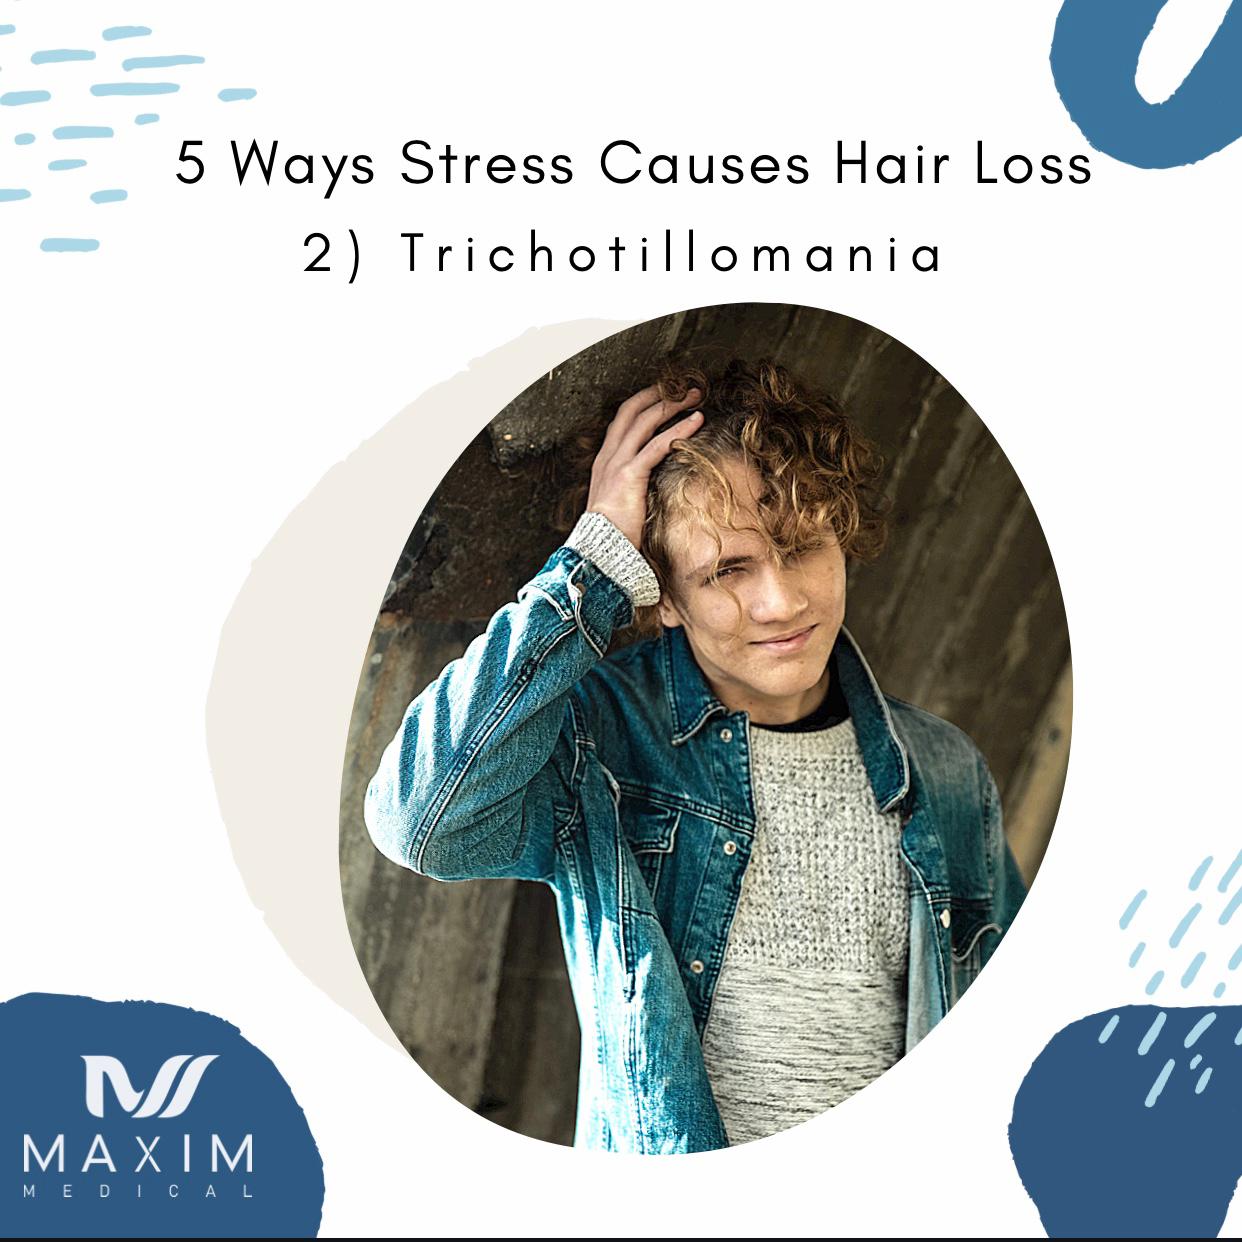 2. Trichotillomania

We’ve all been so stressed out at some point that we’ve felt like we want to pull out our hair. Well, essentially that’s what this means. Trichotillomania can be defined as a compulsive desire to pull out one’s hair. People who struggle with this disorder have an involuntary compulsion to pull out their hair from their scalp or eyebrows, or any other part of the body. The physical effects of this result in patchy bald spots, which causes significant distress and can interfere with social or work functioning. People with trichotillomania may go to great lengths to disguise the loss of hair. For those who have trichotillomania, the urge to pull out hair can vary greatly. For some it is manageable, yet for others it can be unbearable to handle thus making it difficult to function day-to-day.